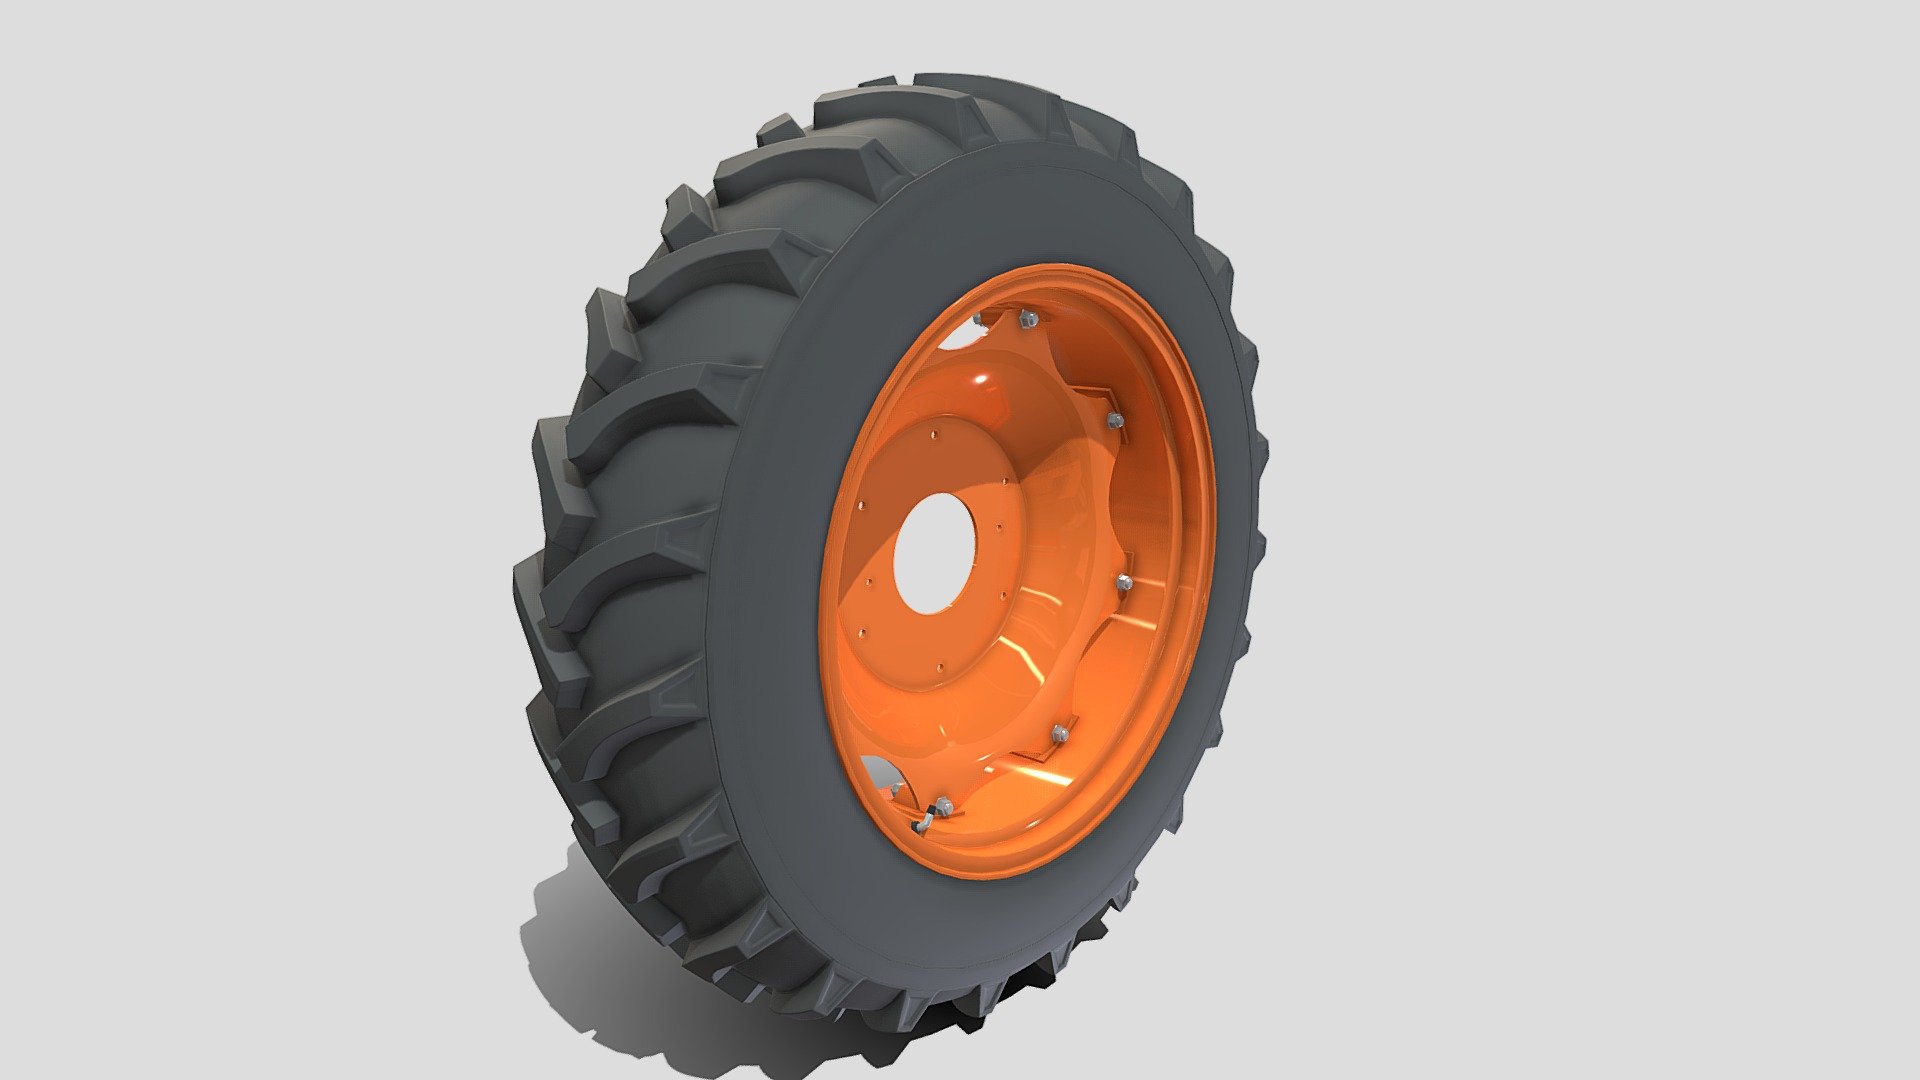 Tractor Wheel 3d model rendered with Cycles in Blender, as per seen on attached images. 
The 3d model is scaled to original size in Blender.

File formats:
-.blend, rendered with cycles, as seen in the images;
-.obj, with materials applied;
-.dae, with materials applied;
-.fbx, with materials applied;
-.stl;

Files come named appropriately and split by file format.

3D Software:
The 3D model was originally created in Blender 2.8 and rendered with Cycles.

Materials and textures:
The models have materials applied in all formats, and are ready to import and render.

Preview scenes:
The preview images are rendered in Blender using its built-in render engine &lsquo;Cycles'.
Note that the blend files come directly with the rendering scene included and the render command will generate the exact result as seen in previews.
Scene elements are on a different layer from the actual model for easier manipulation of objects.

General:
The models are built mostly out of quads and are subdivisable.
It co - Full Tractor wheel v2 - Buy Royalty Free 3D model by dragosburian 3d model